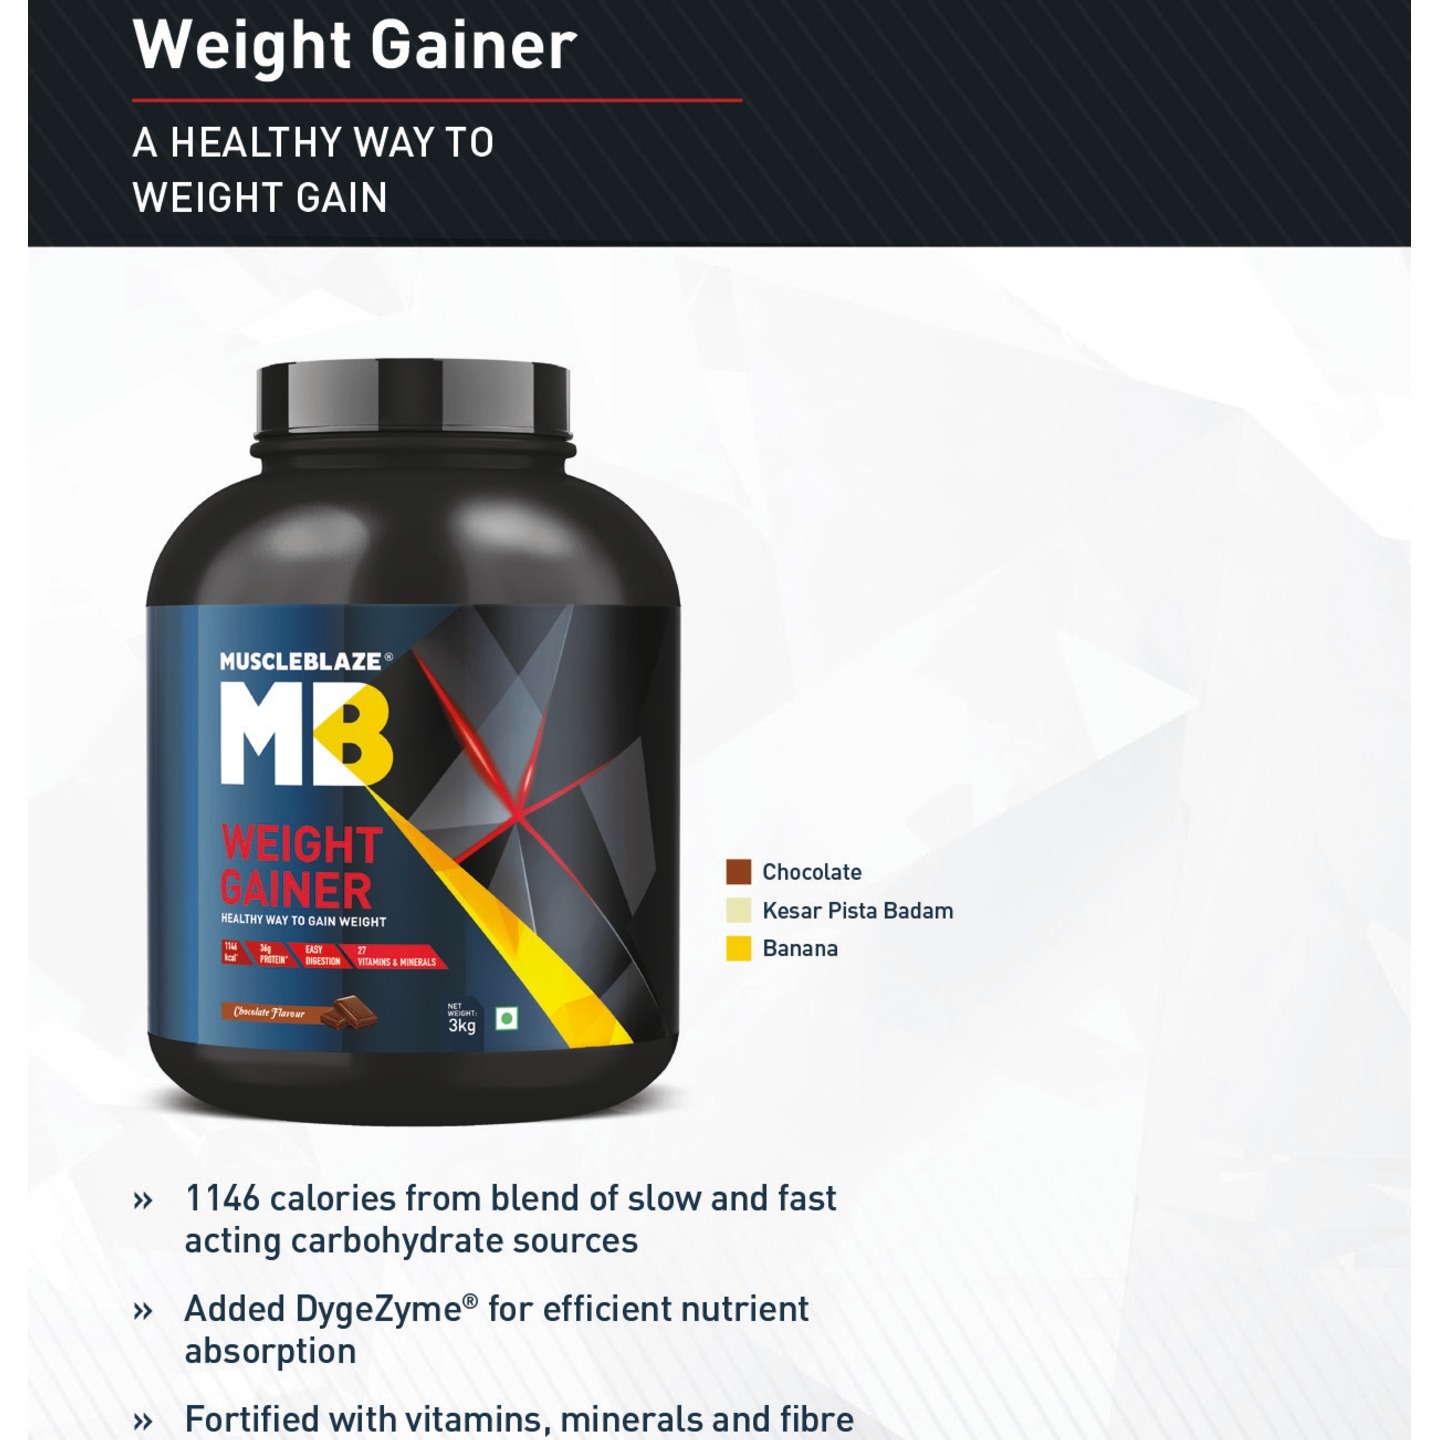 MuscleBlaze Weight Gainer with Added Digezyme, 3 Kg Chocolate